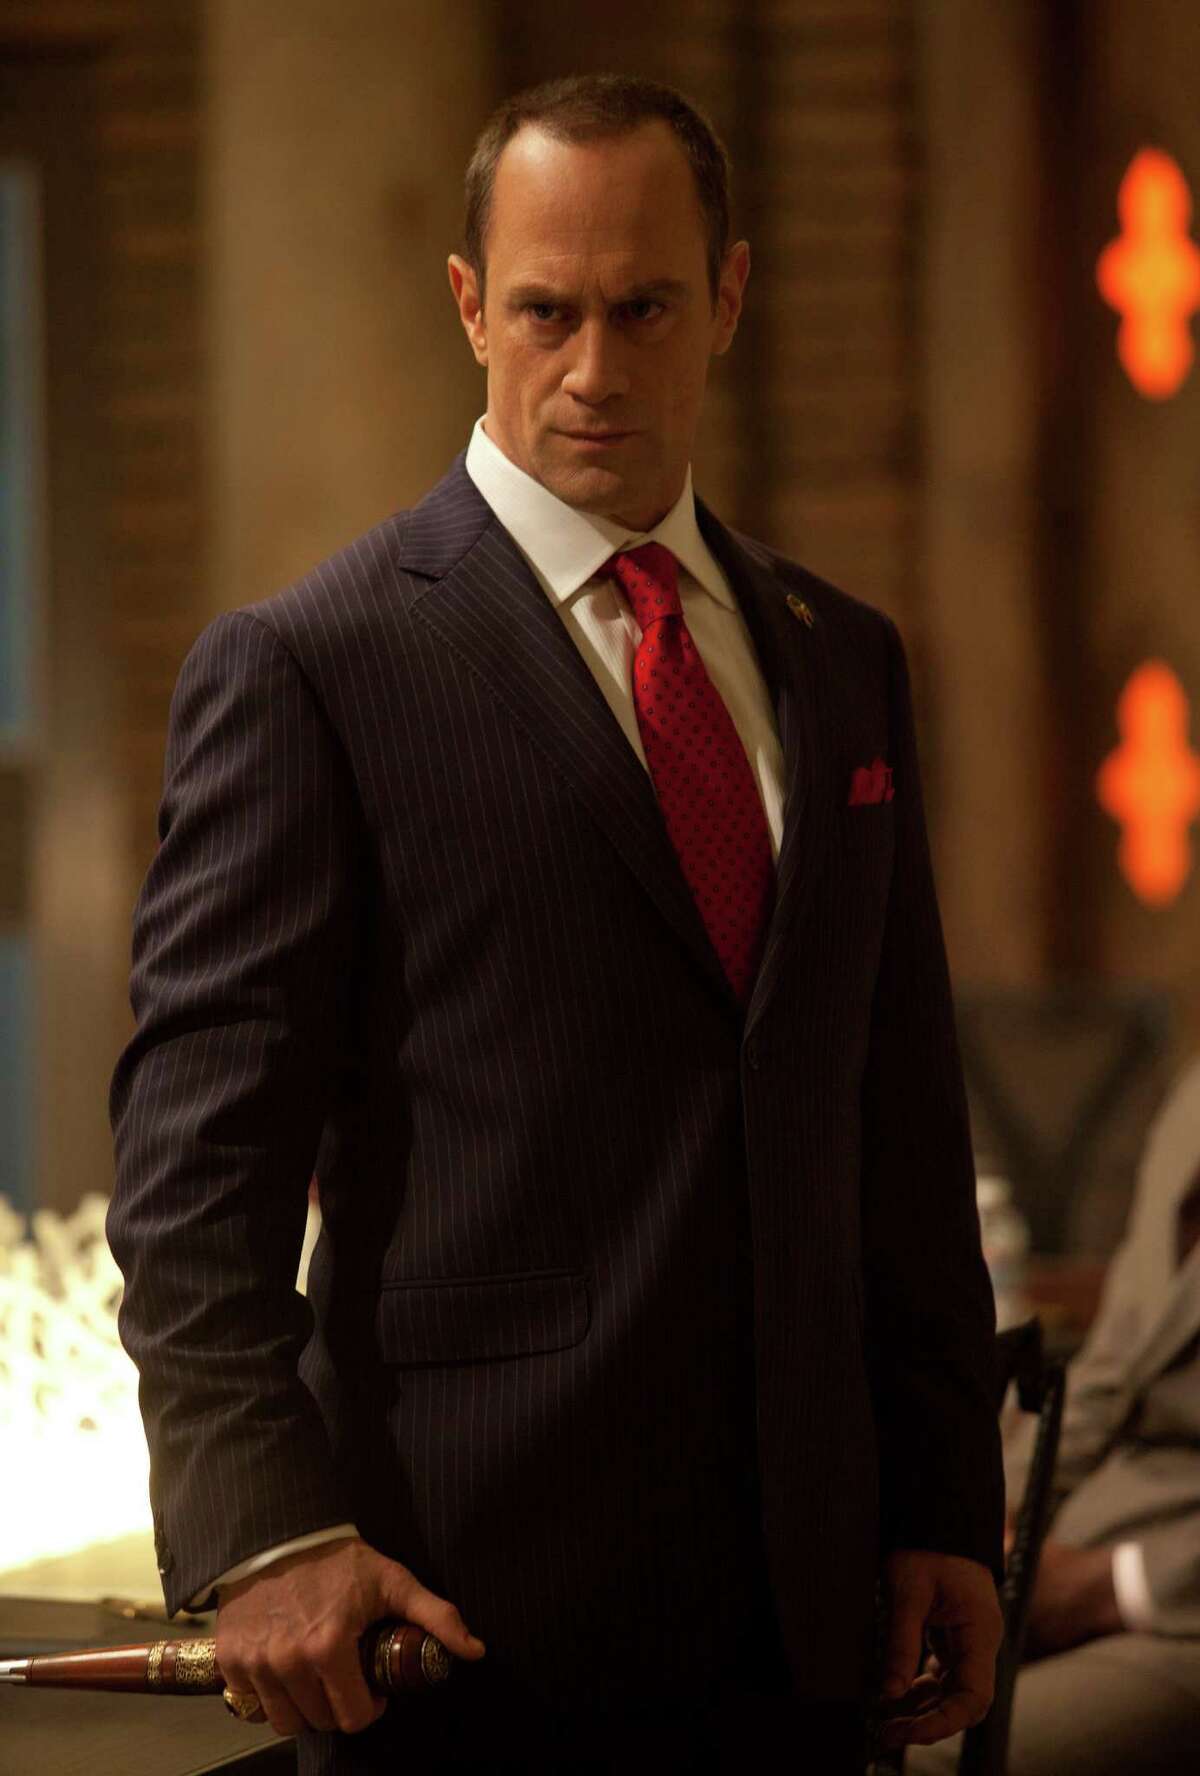 As Guardian of The Authority, Roman (Christopher Meloni) is "fighting against what he sees as fanatics," Meloni says of his "True Blood" character.